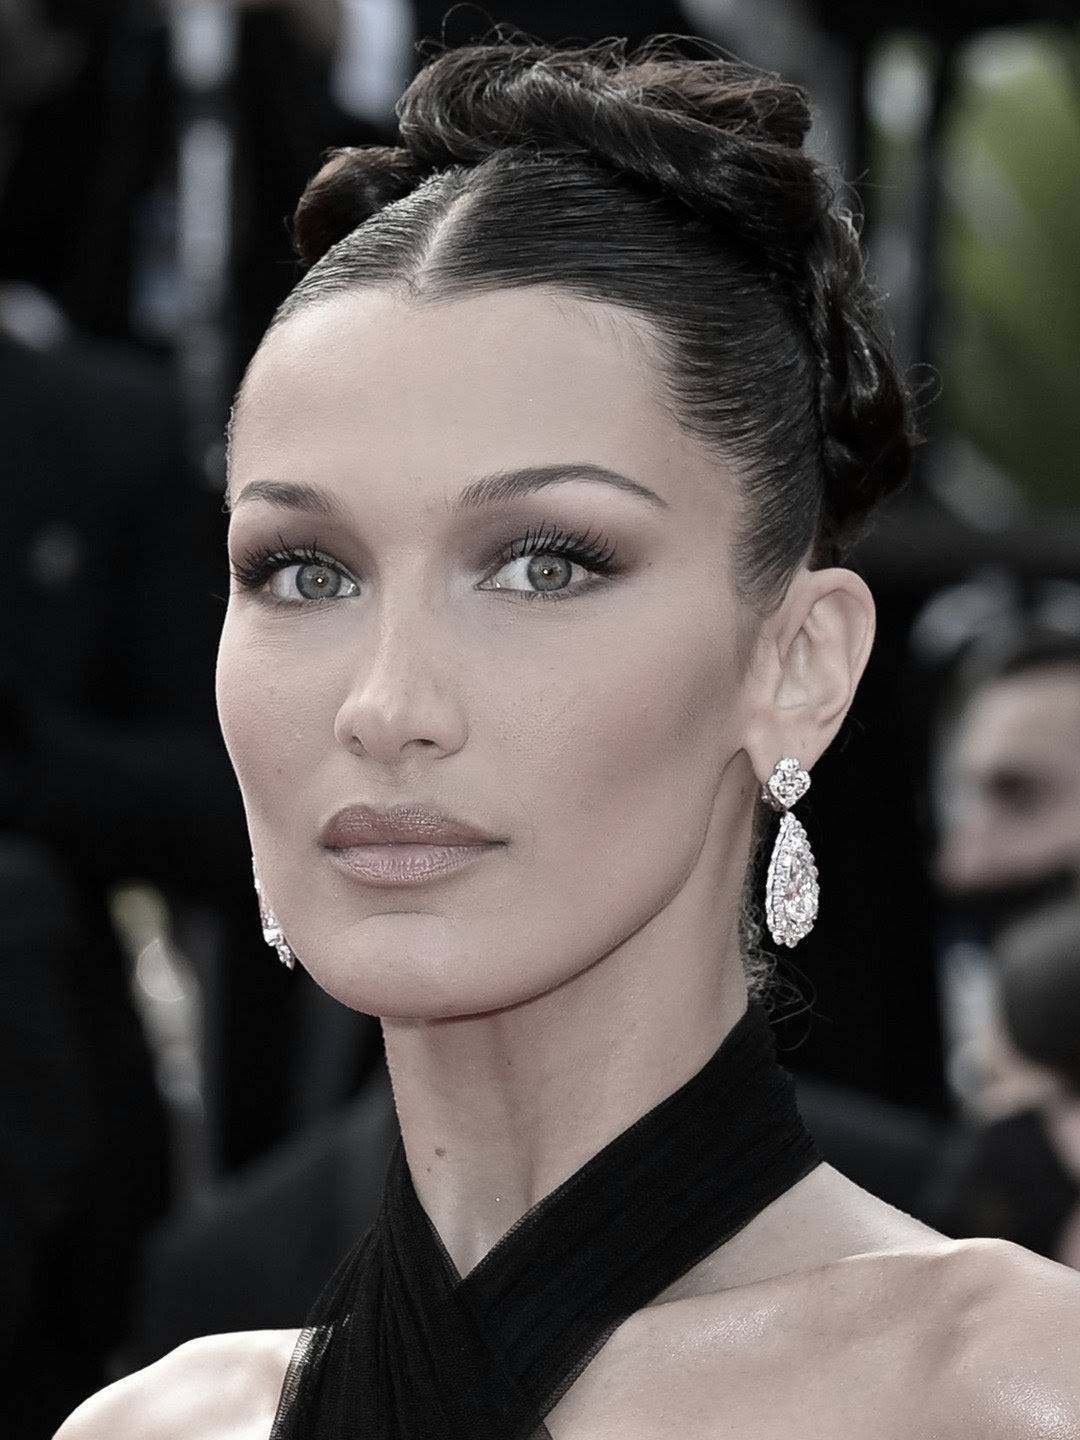 Get to Know Bella Hadid: Biography, Net Worth, Family Members, and Age